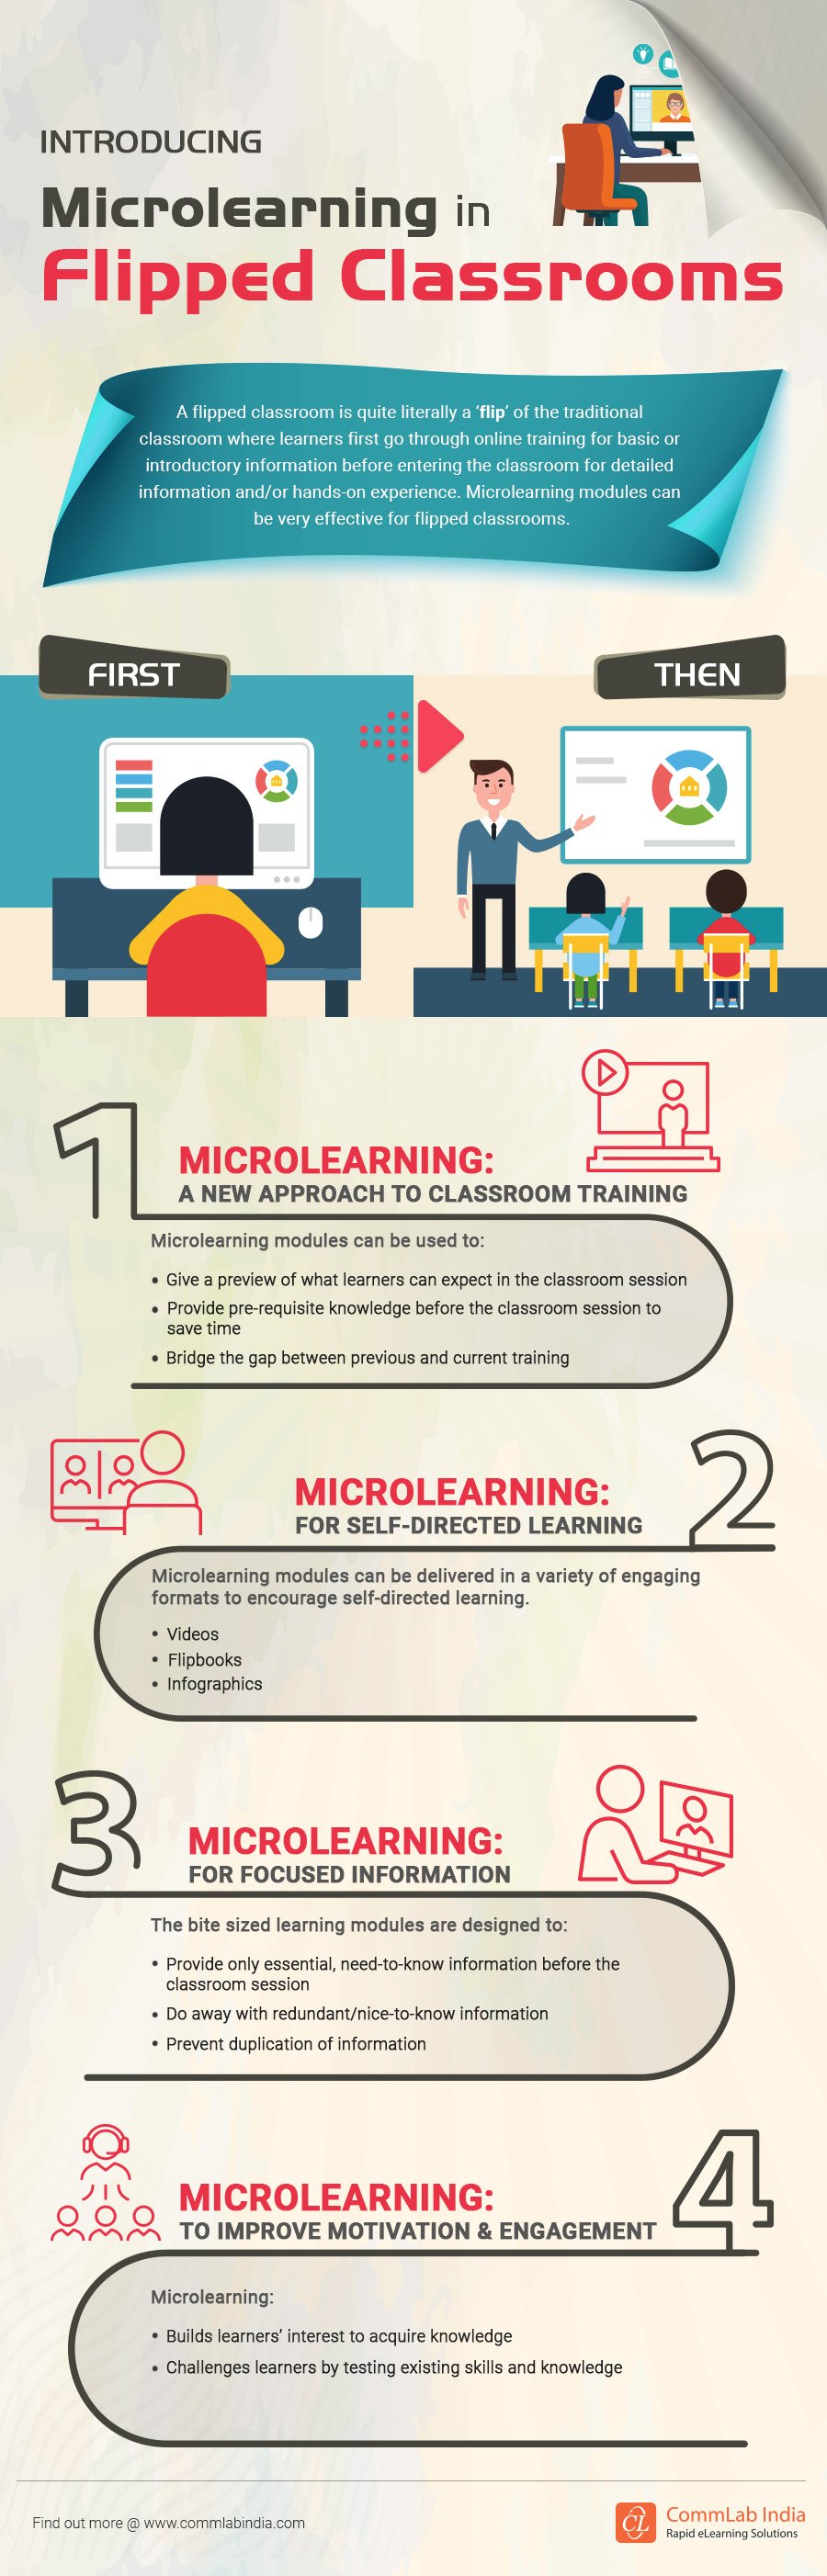 Microlearning Modules to Enrich Your Flipped Classroom Sessions